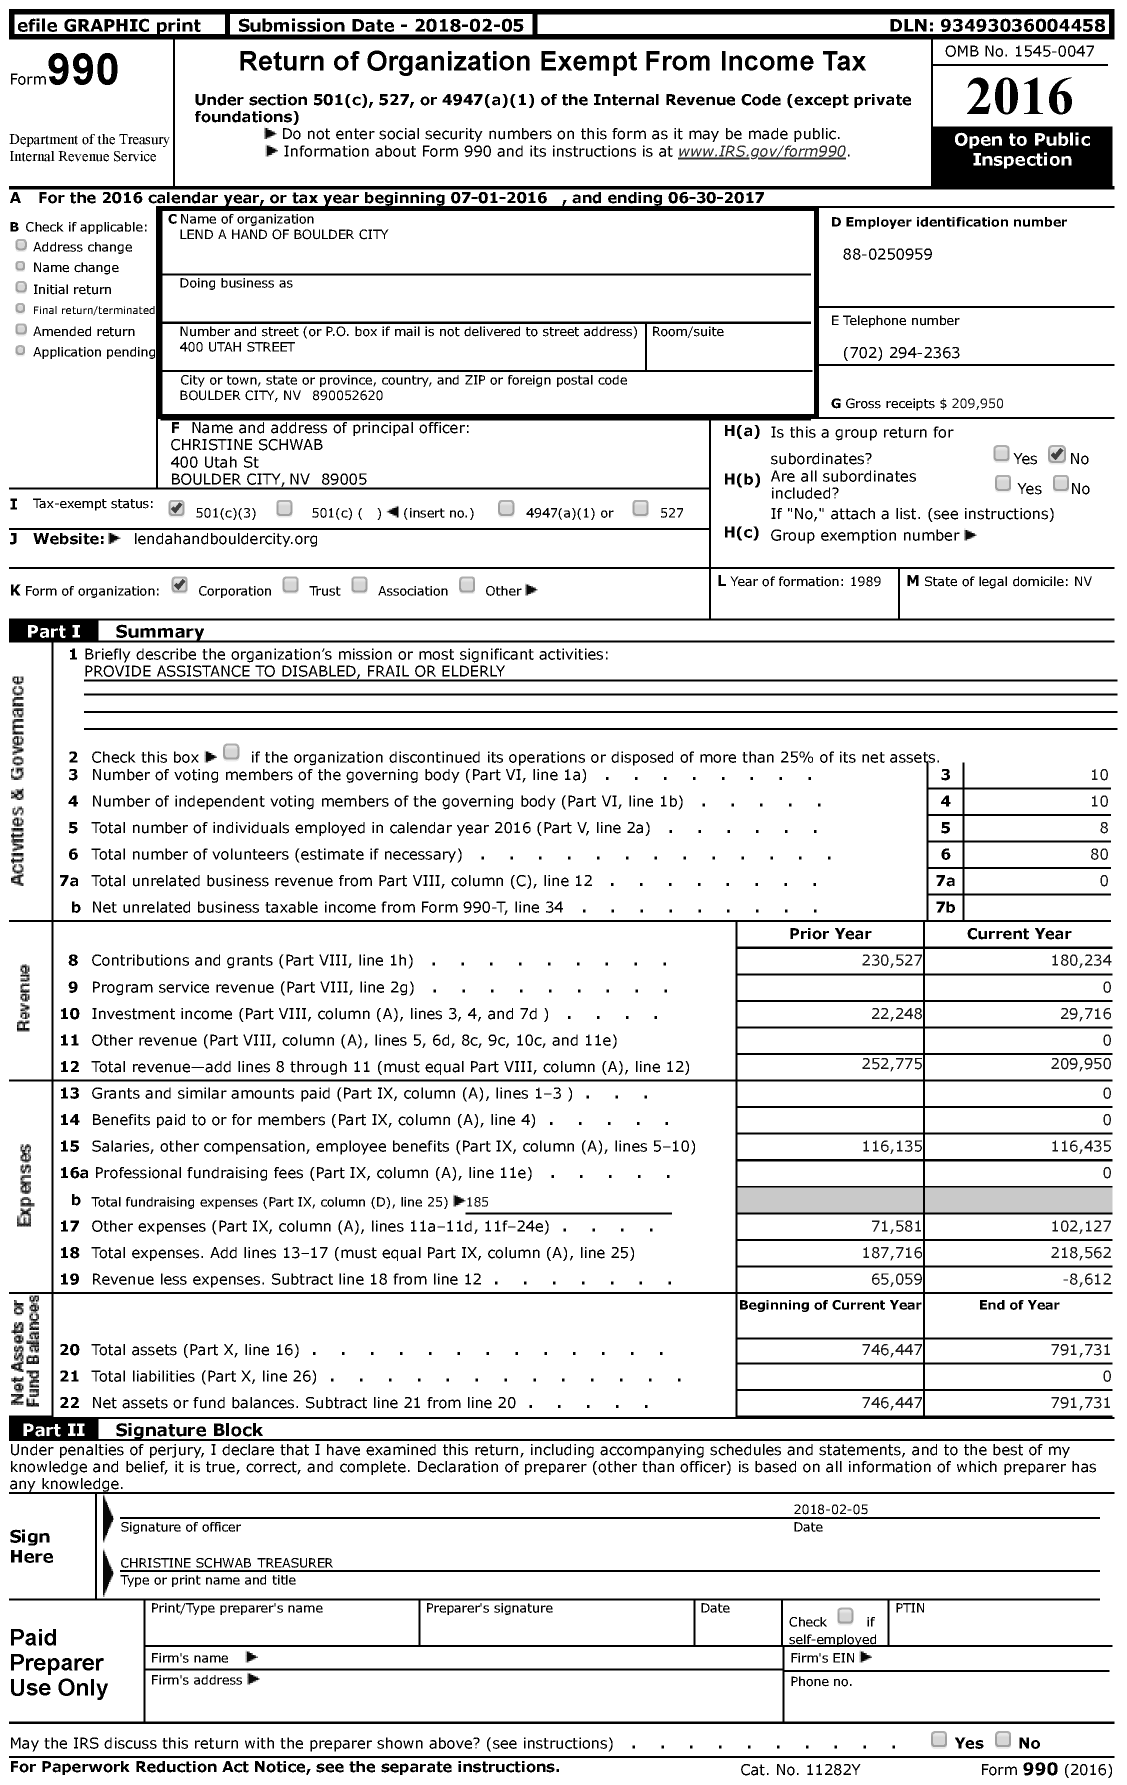 Image of first page of 2016 Form 990 for Lend A Hand of Boulder City